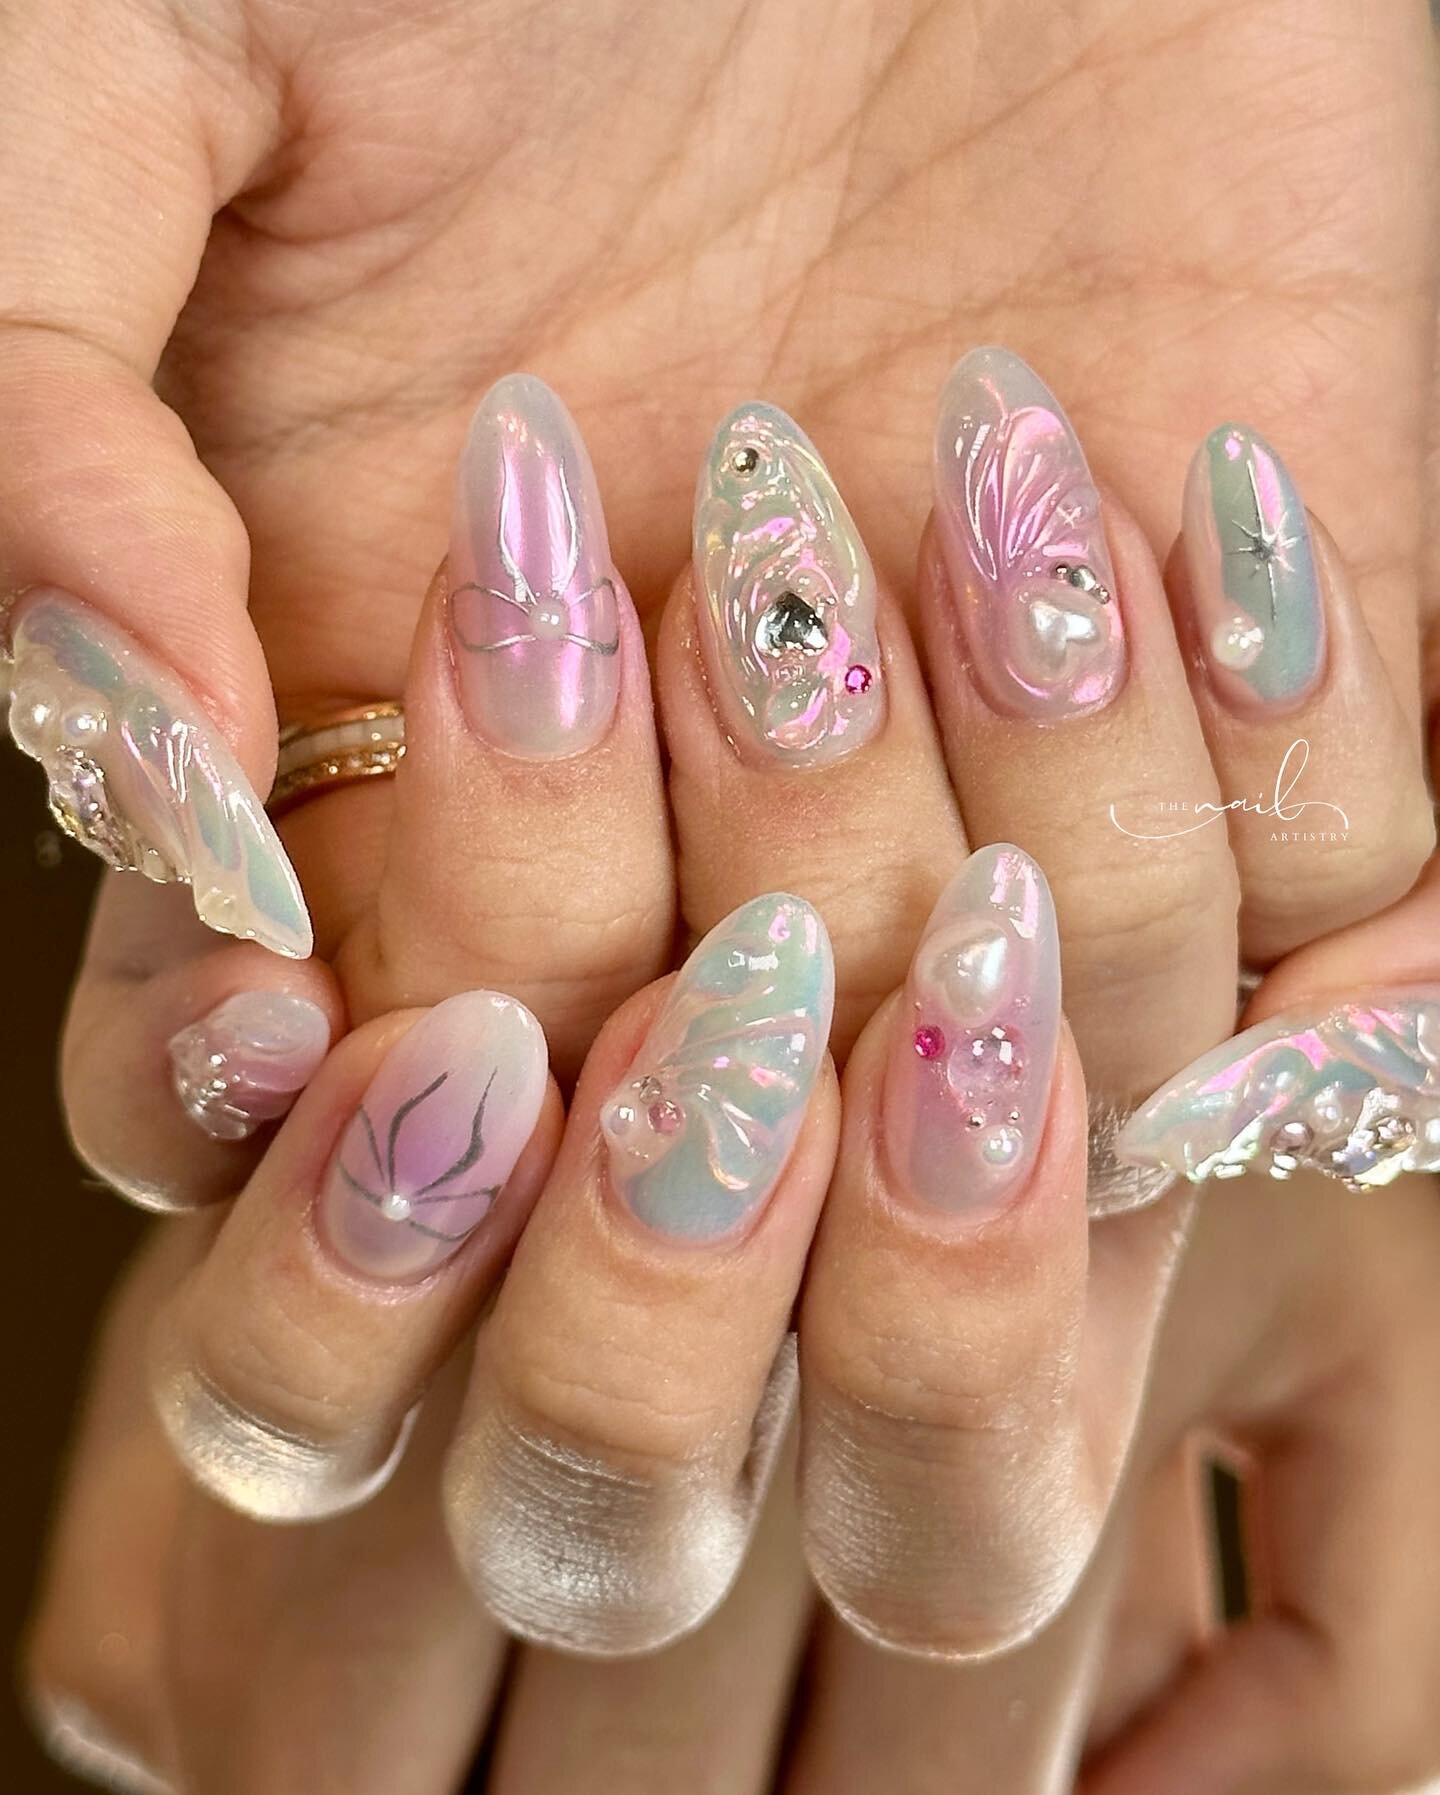 Ethereal beauty 🎀⭐️💖 let&rsquo;s swipe to see all the pretty details

🫧✨ Aura Sunset Chrome Effects with Hand-painted bespoke arts ribbons, pearly hearts, 3D Crystal effects
✨🫧 To book for this set- Please book via link in bio / Walk-in availabil